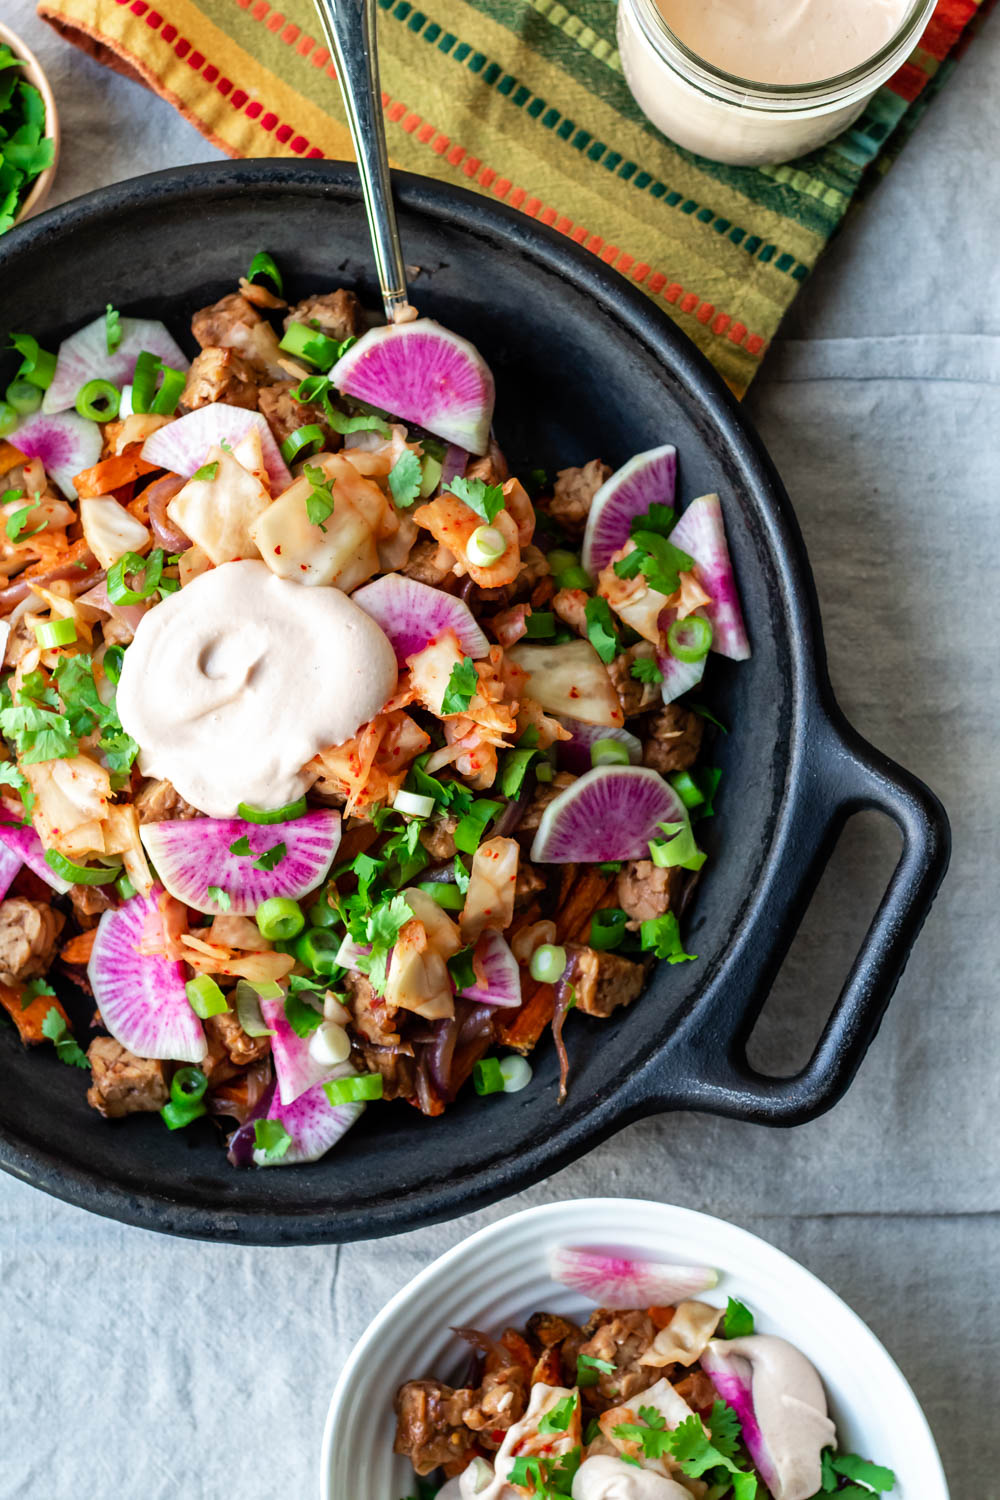 featured image in the post showing an overhead shot of the loaded korean sweet potato fries in a large cast iron skillet